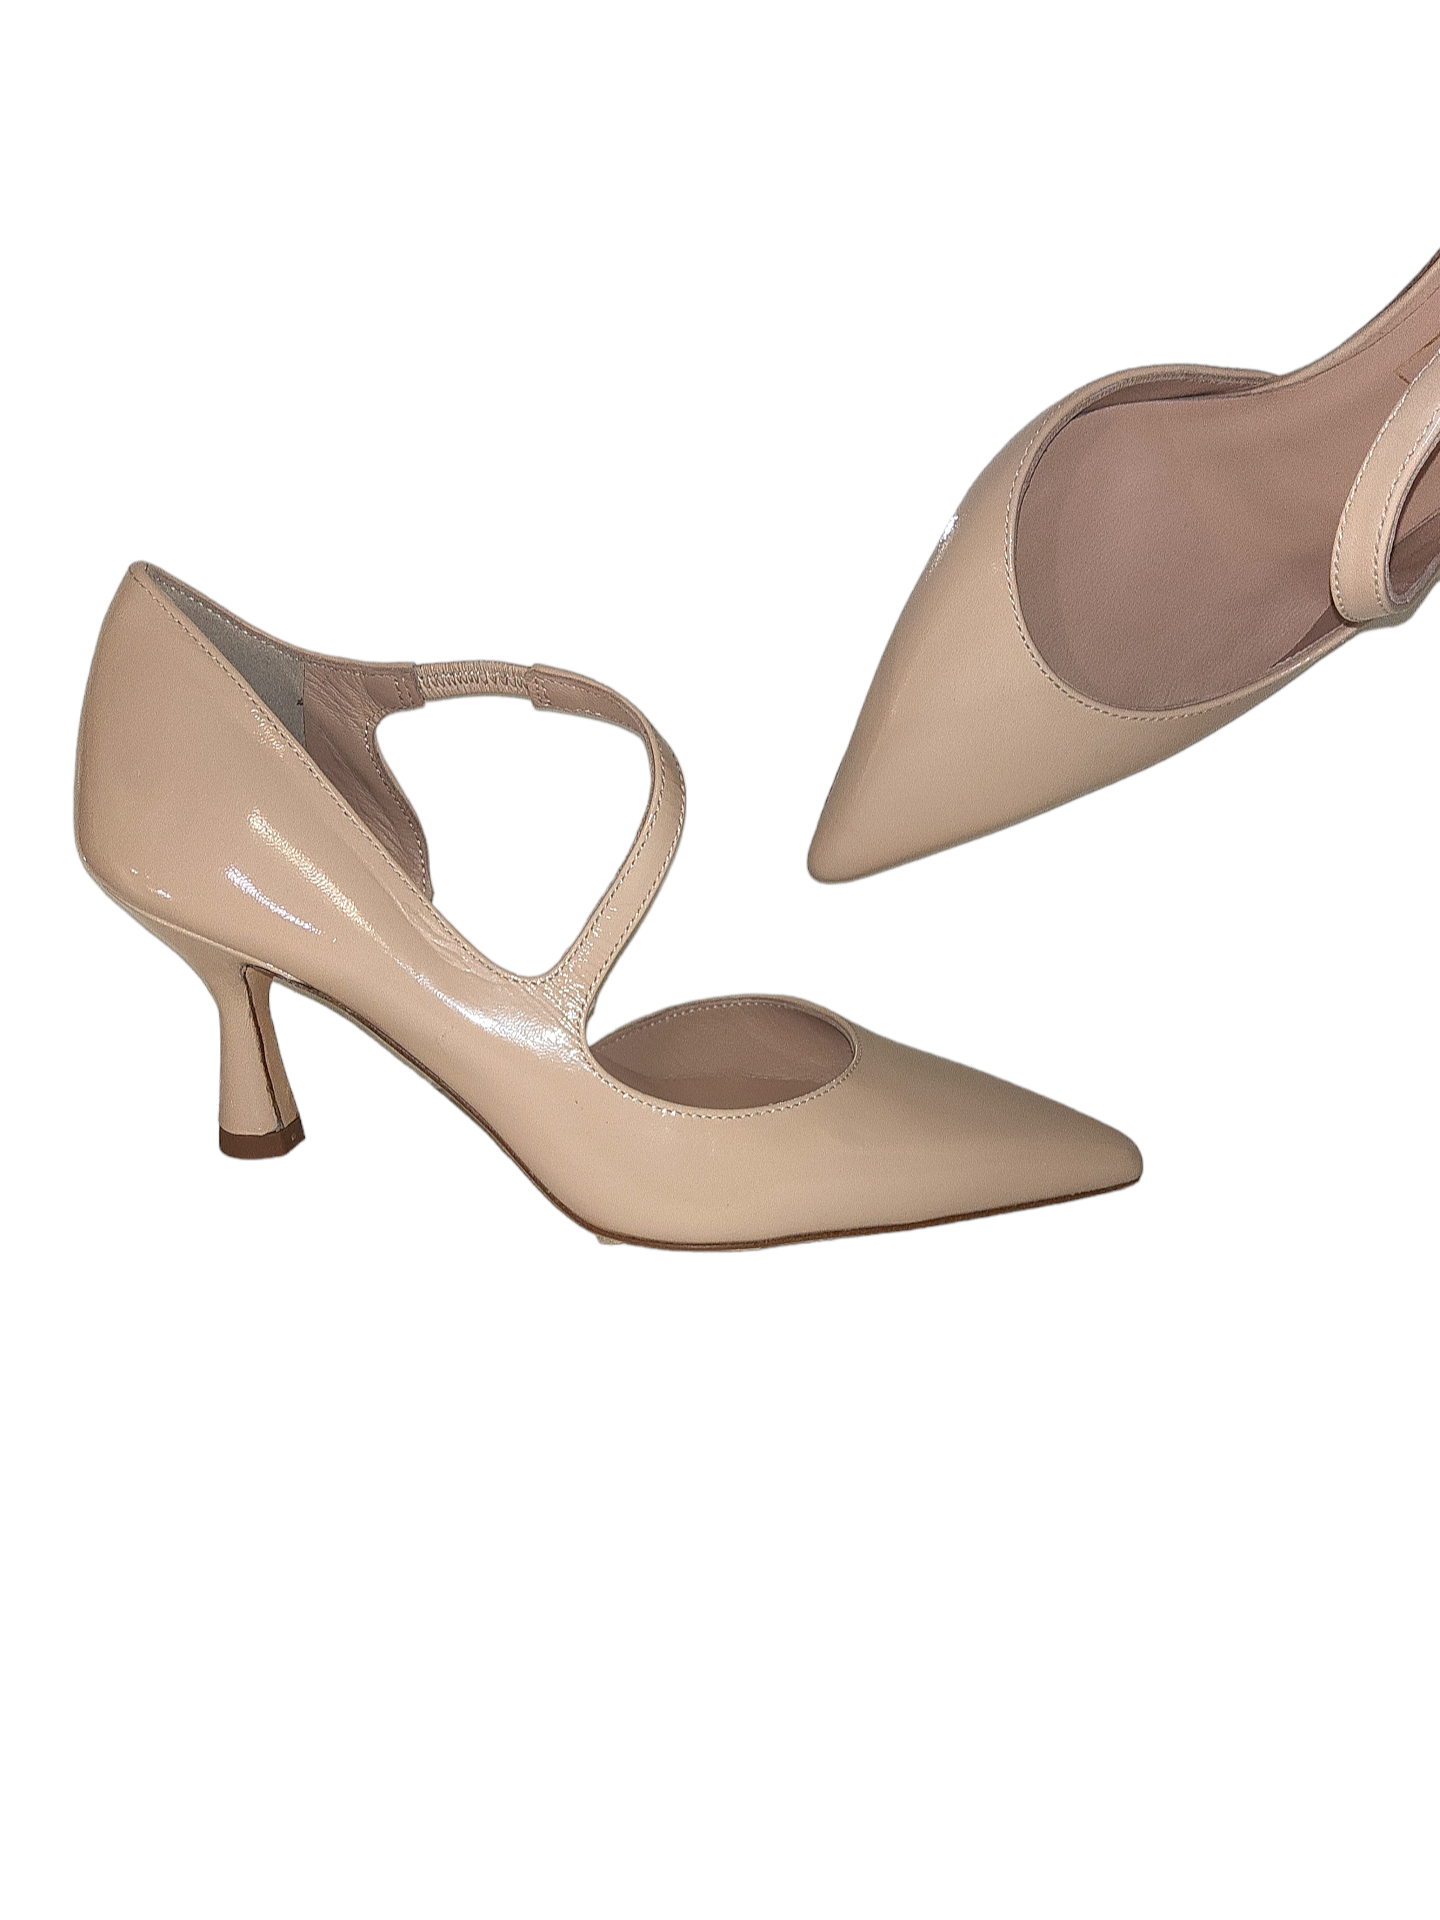 Nude leather court shoe